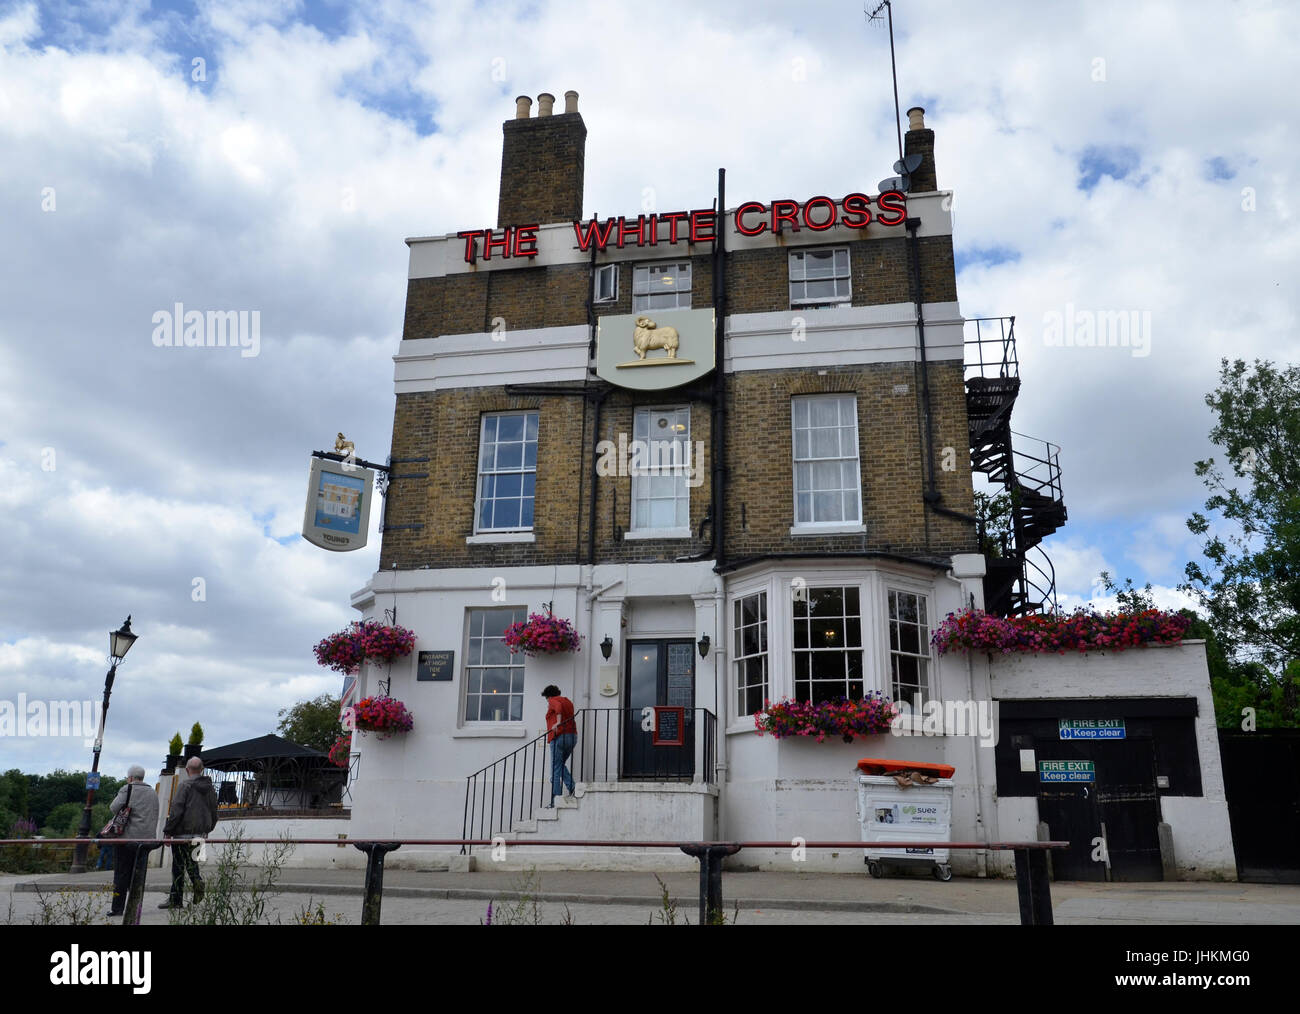 The White Cross pub on the River Thames at Richmond in West London Stock Photo